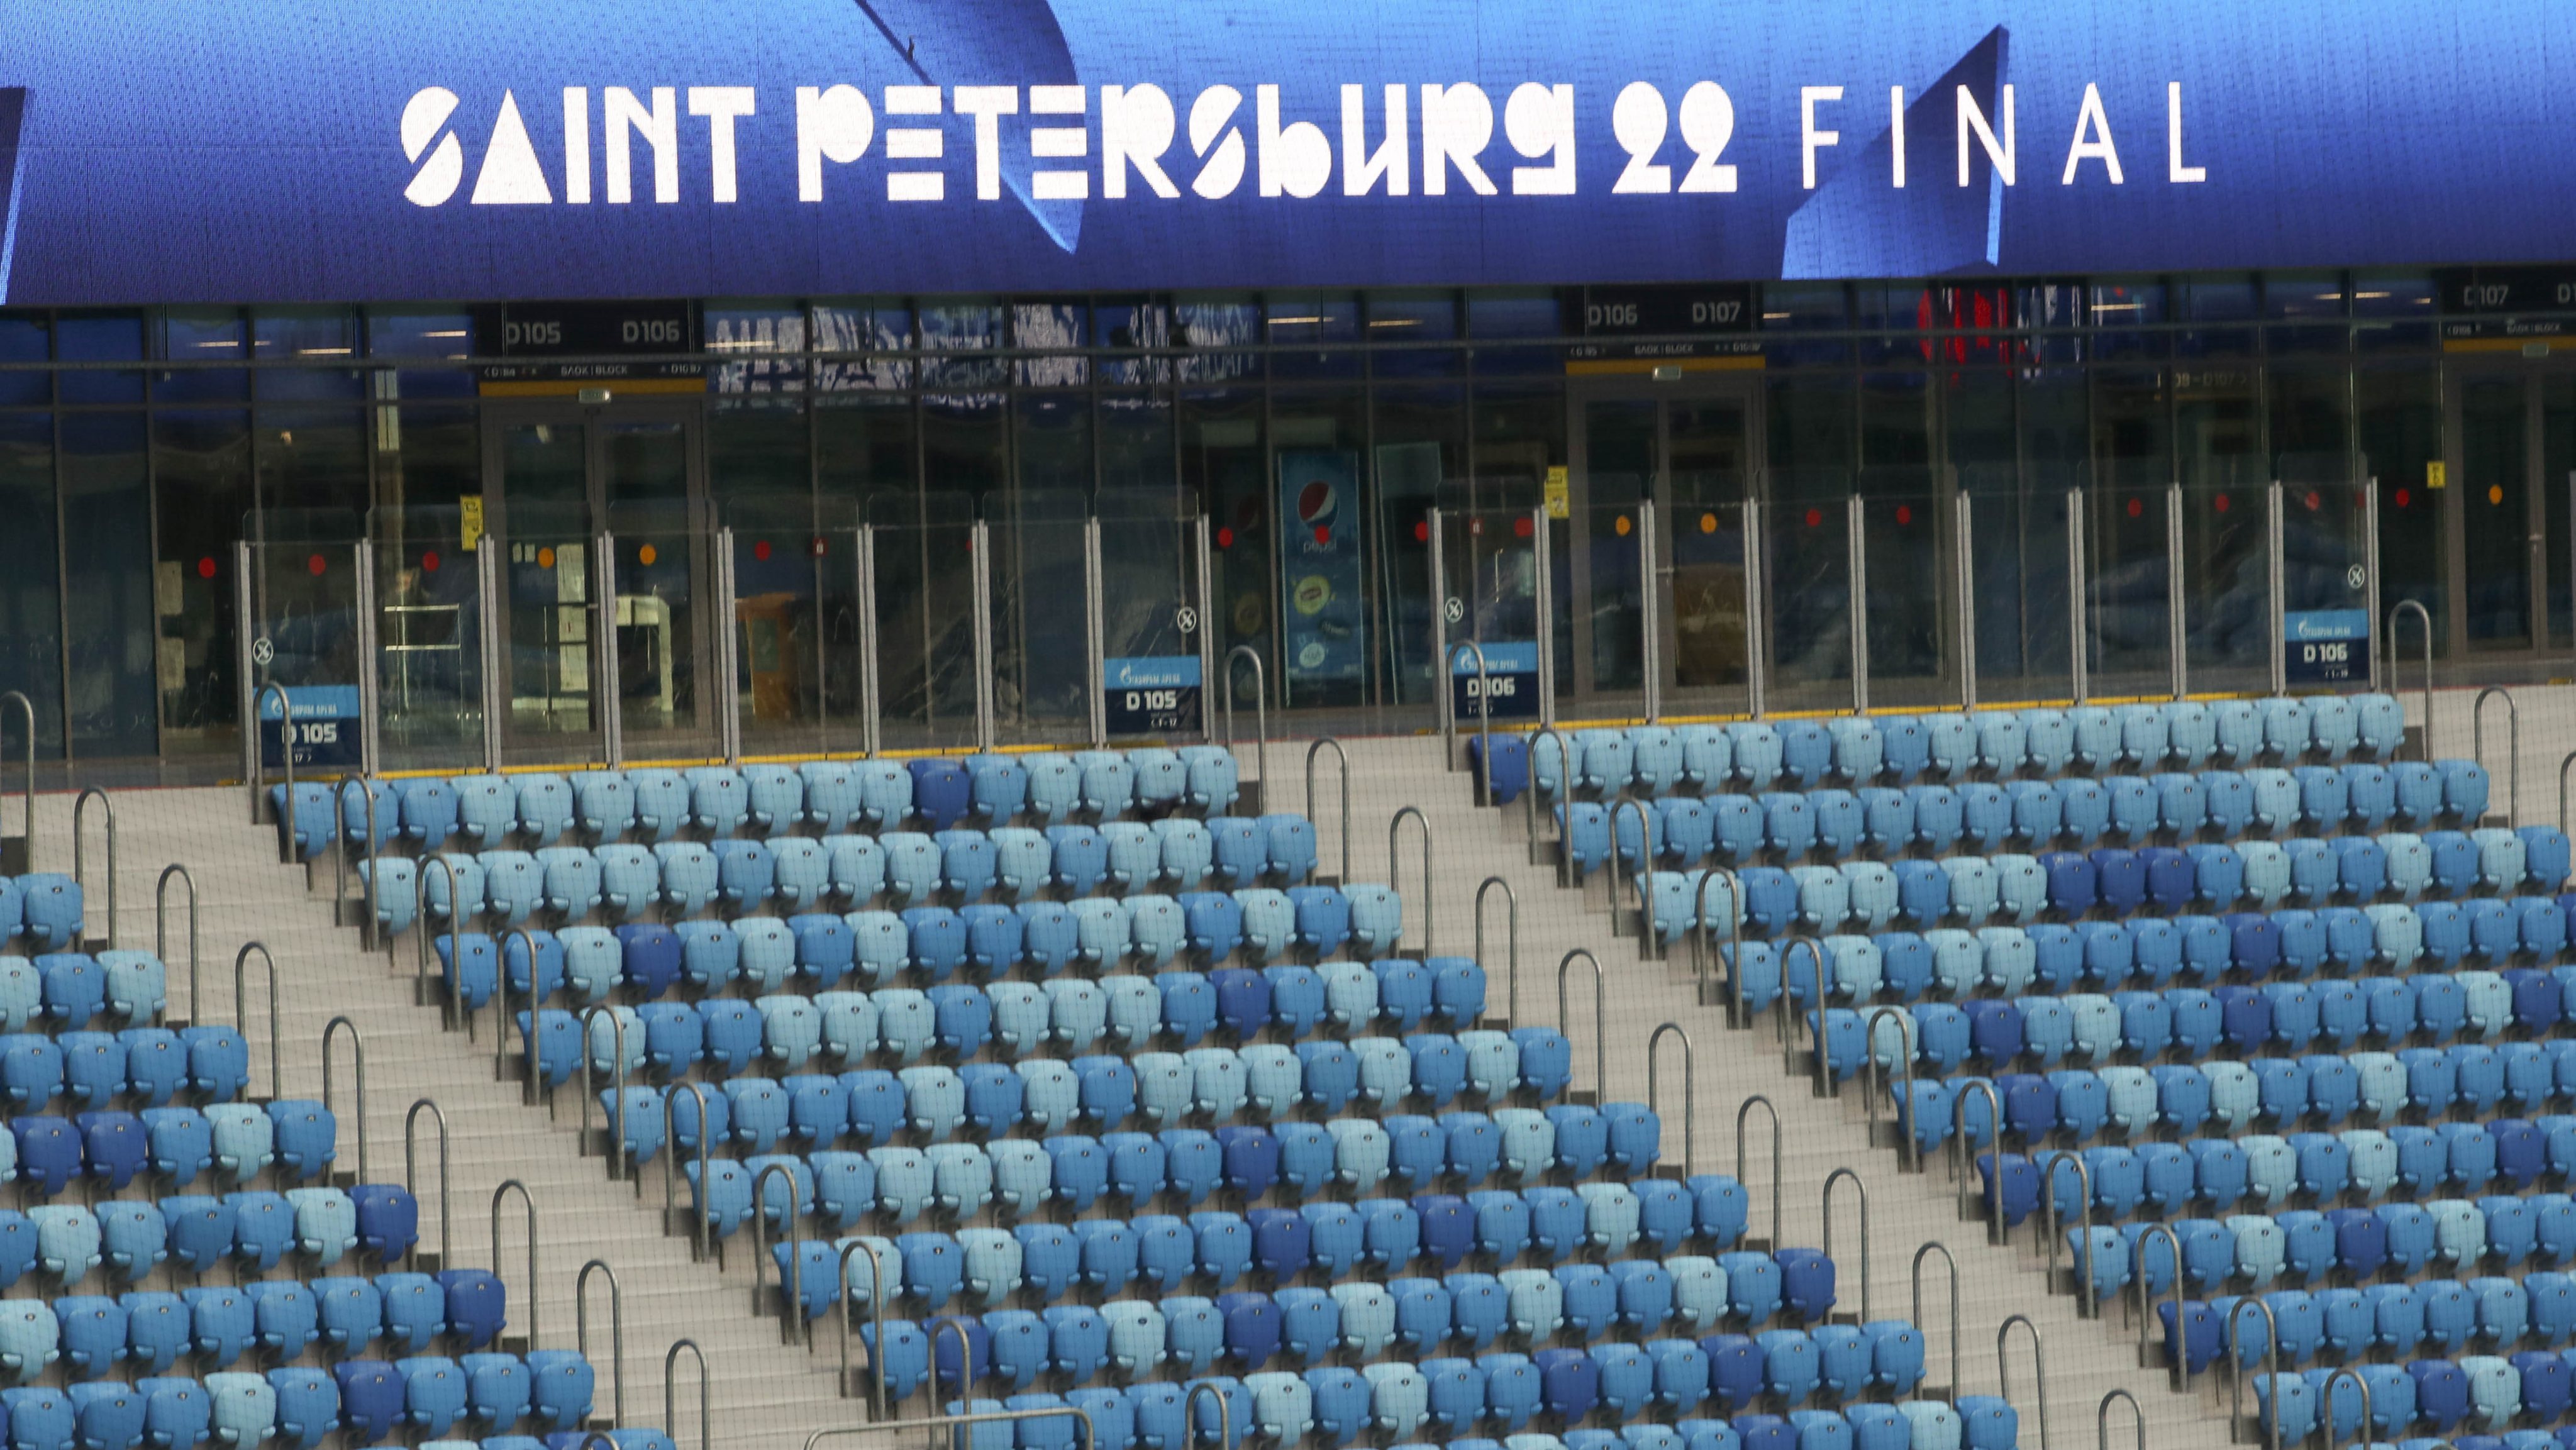 UEFA officials inspect St Petersburg&#039;s Gazprom Arena ahead of 2022 Champions League Final